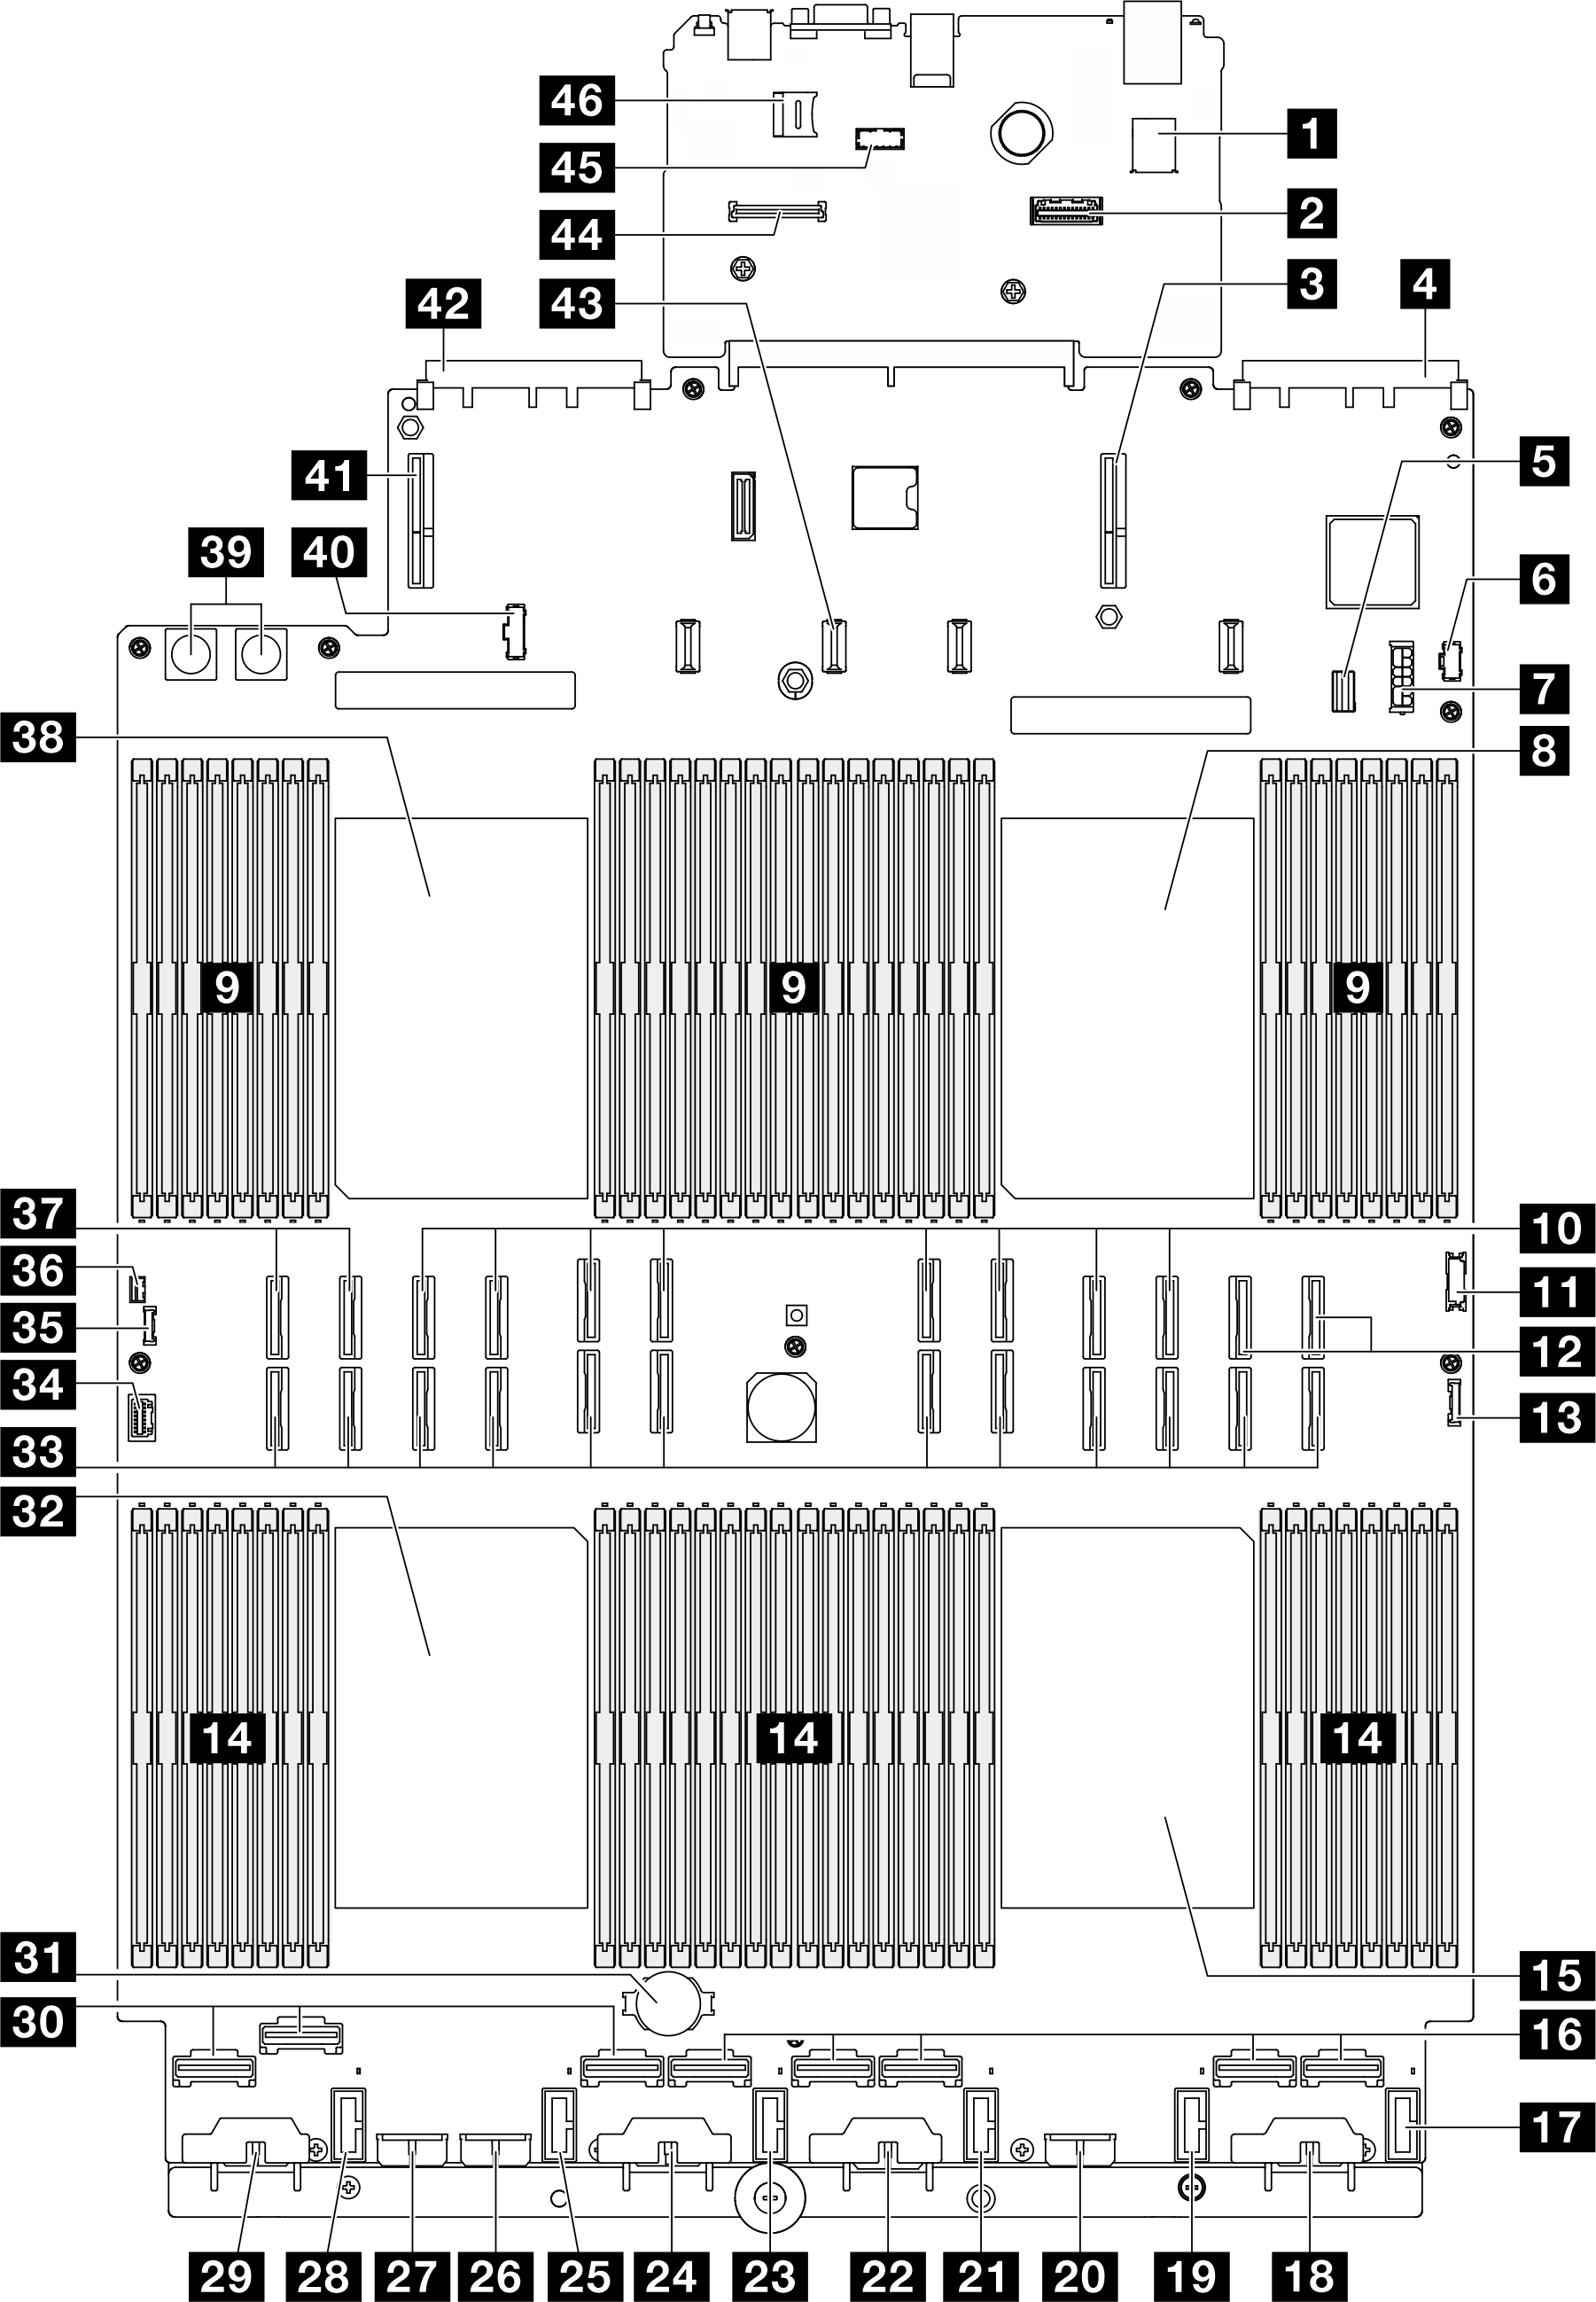 System-board-assembly connectors